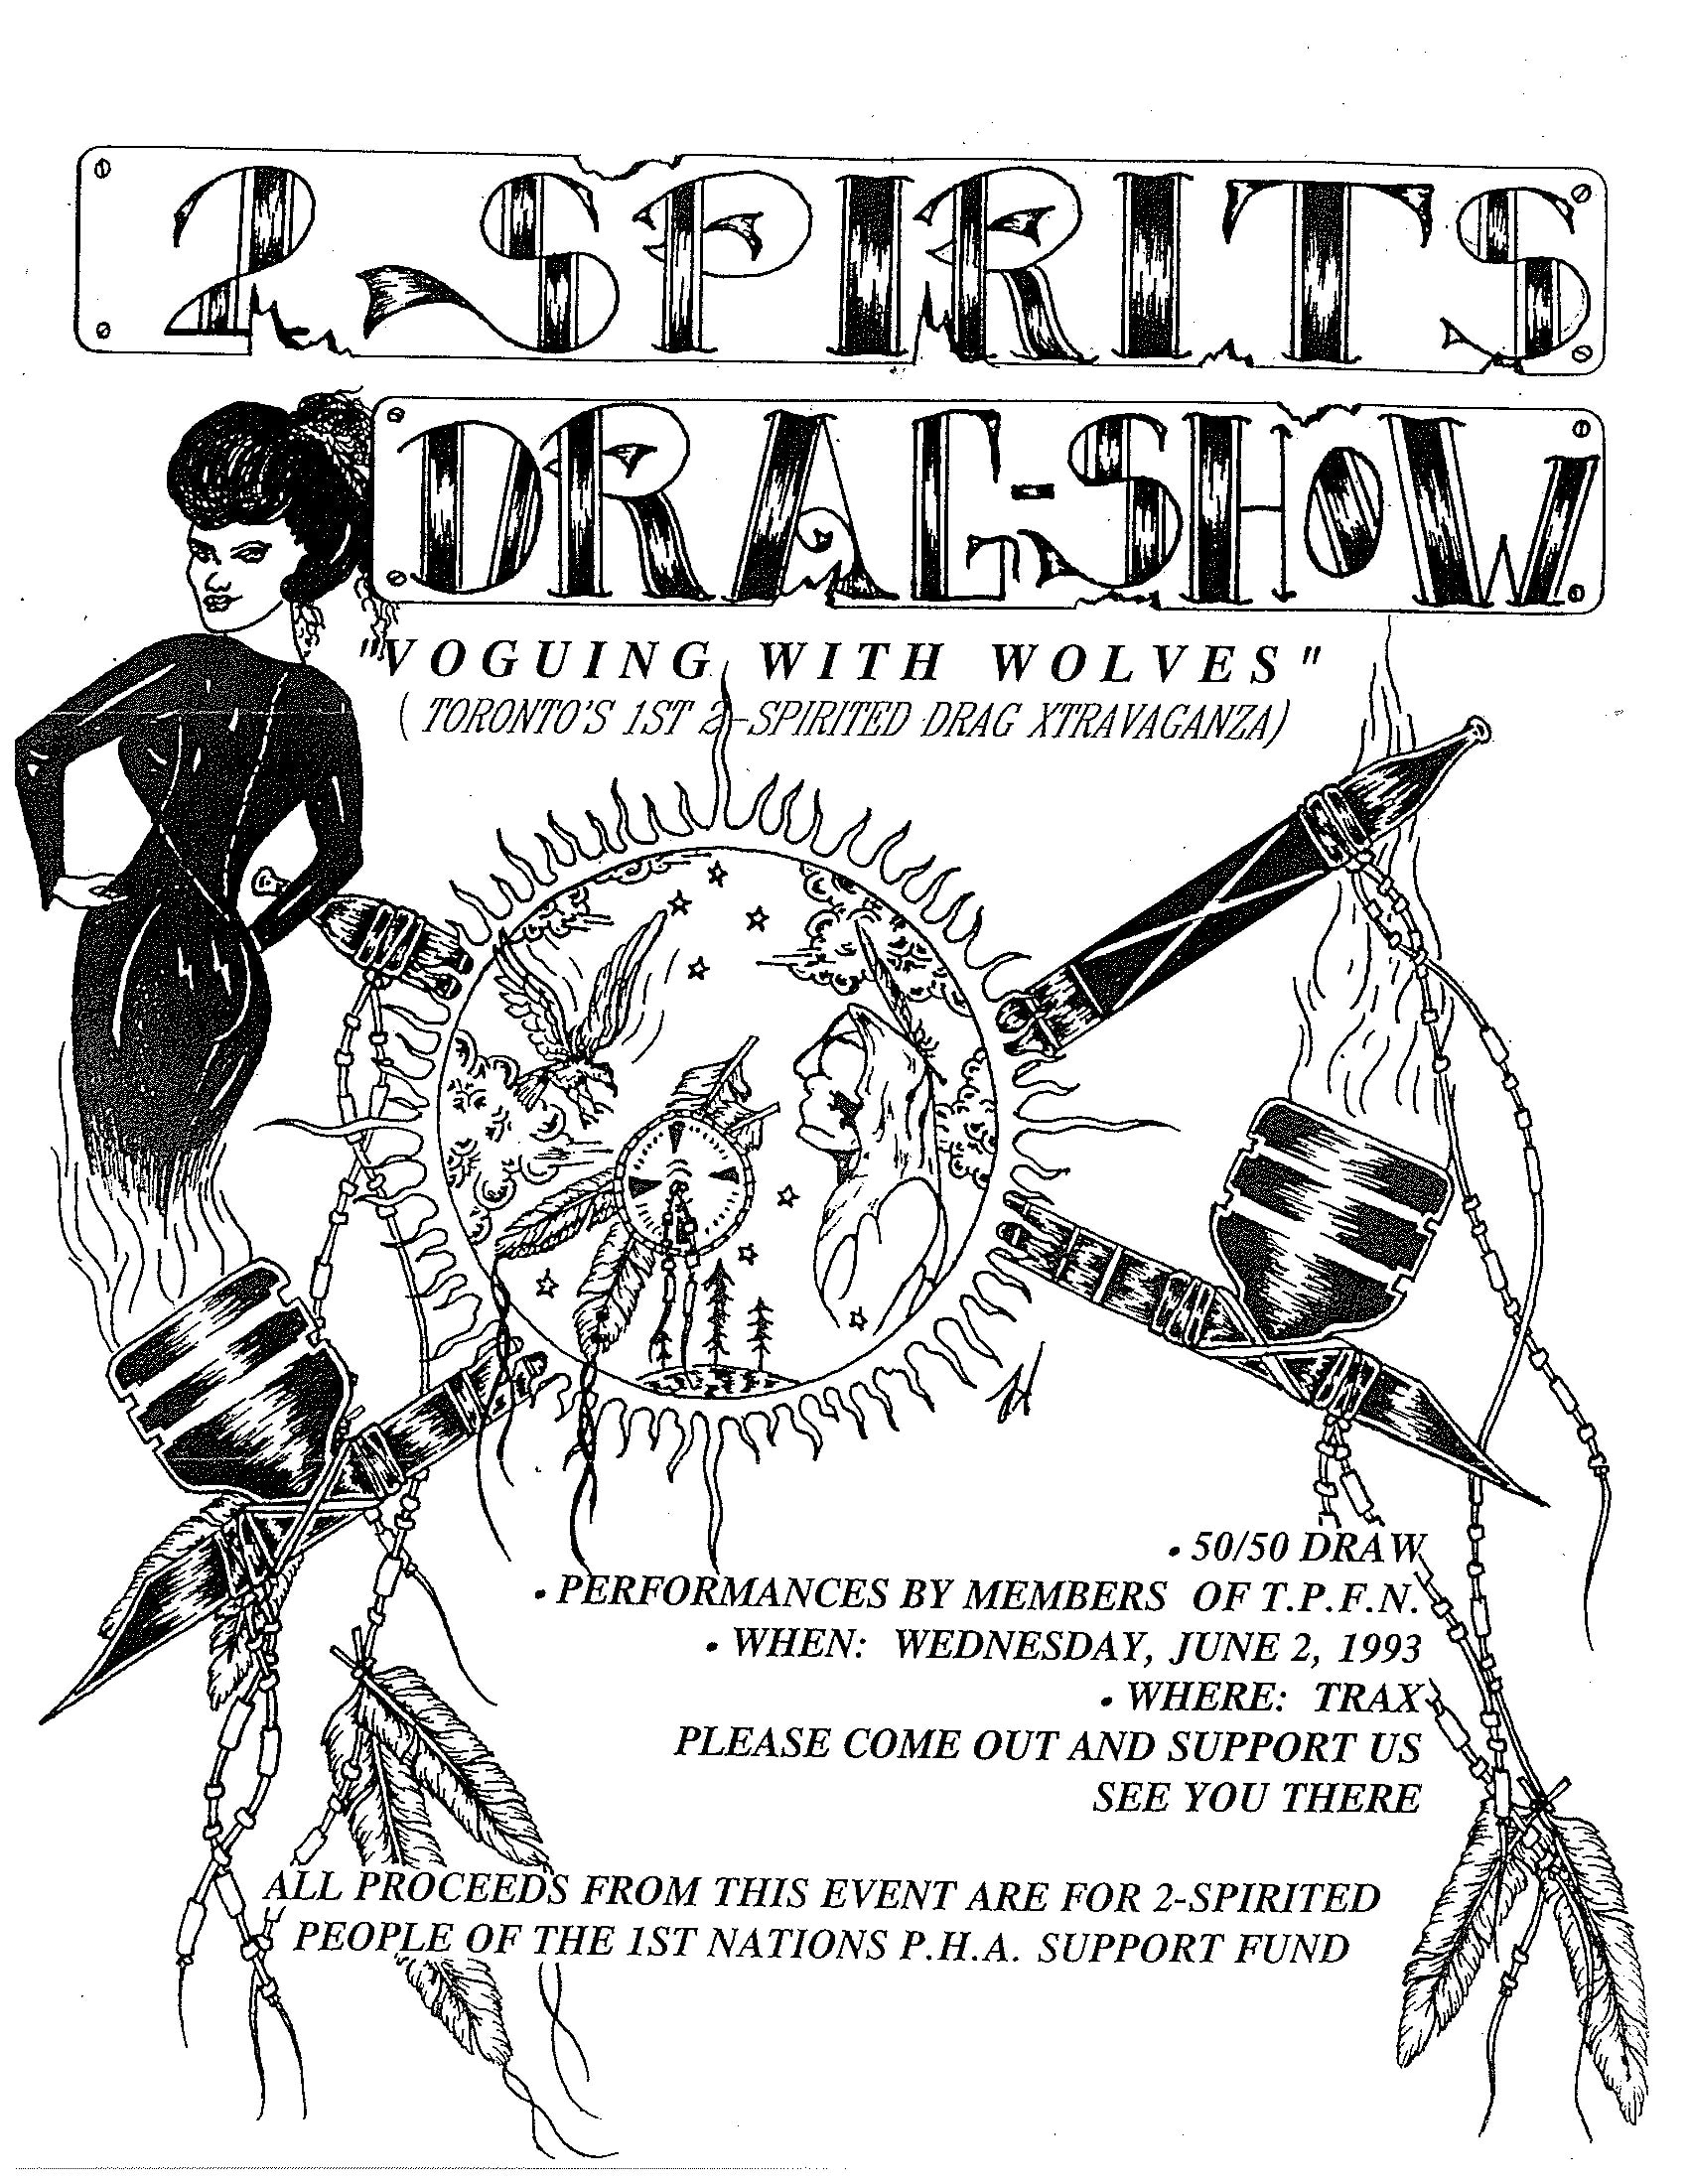 Illustration of two crossed pipes adorned with beads and feathers. A person wearing a tight black dress is coming out of the flames of one of the pipes. At the point where the pipes overlap, there is a sun containing a person and a bird surrounded by stars, clouds, and trees. Text reading, “2 Spirits drag-show” has been drawn by hand in old-school tattoo style block letters. Additional text reads, “‘voguing with wolves’; (Toronto’s 1st 2-Spirited Drag Xtravaganza); 50/50 draw; performances by members of T.P.F.N.; when: Wednesday, June 2, 1993; where: Trax; please come out and support us; see you there; all proceeds from this event are for 2-Spirited People of the 1st Nations P.H.A. support fund.”